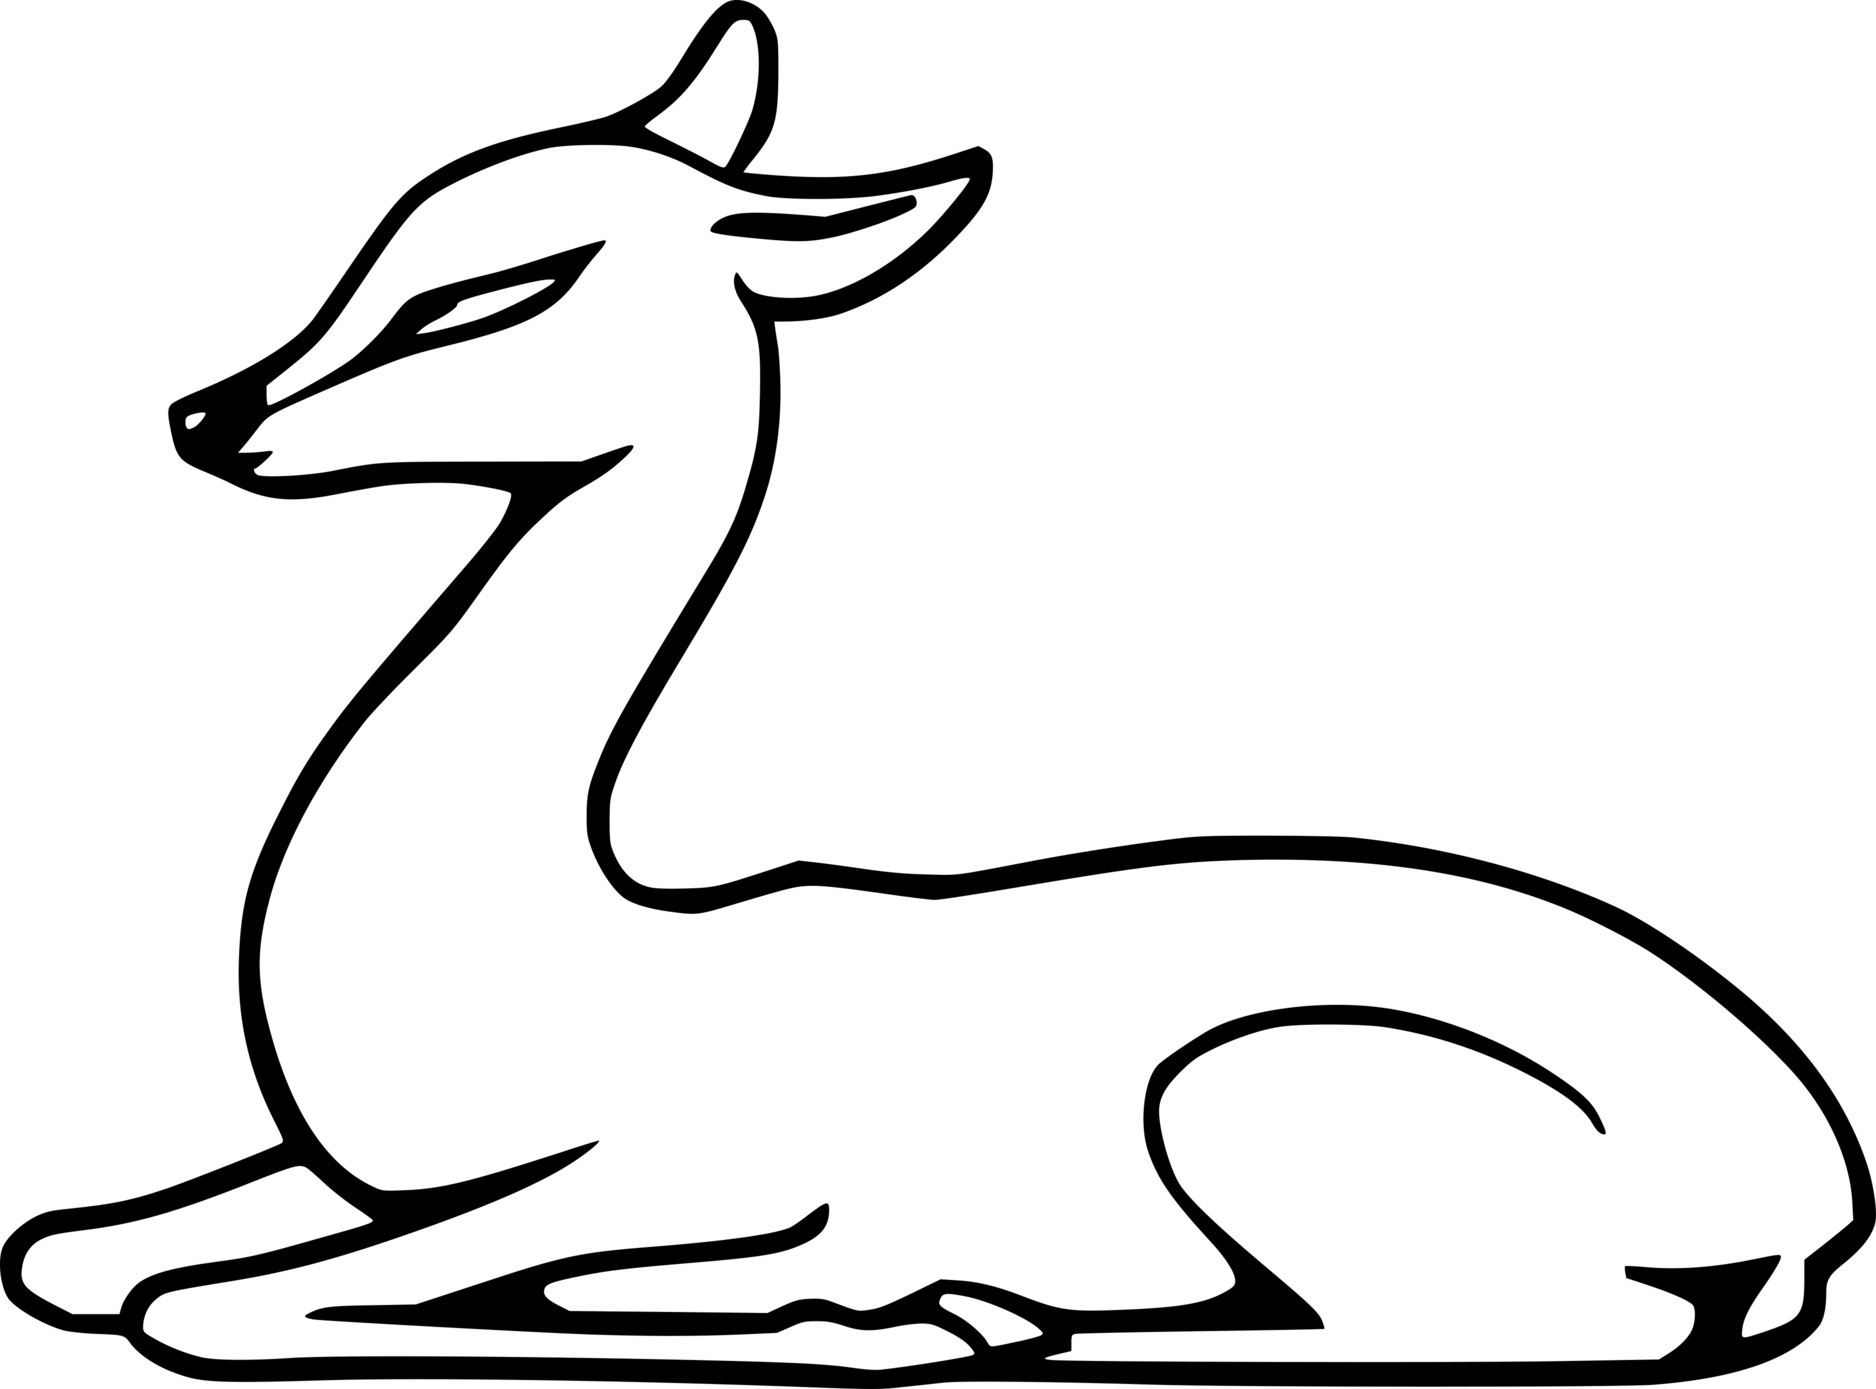 Cute Deer On The Ground Coloring Page